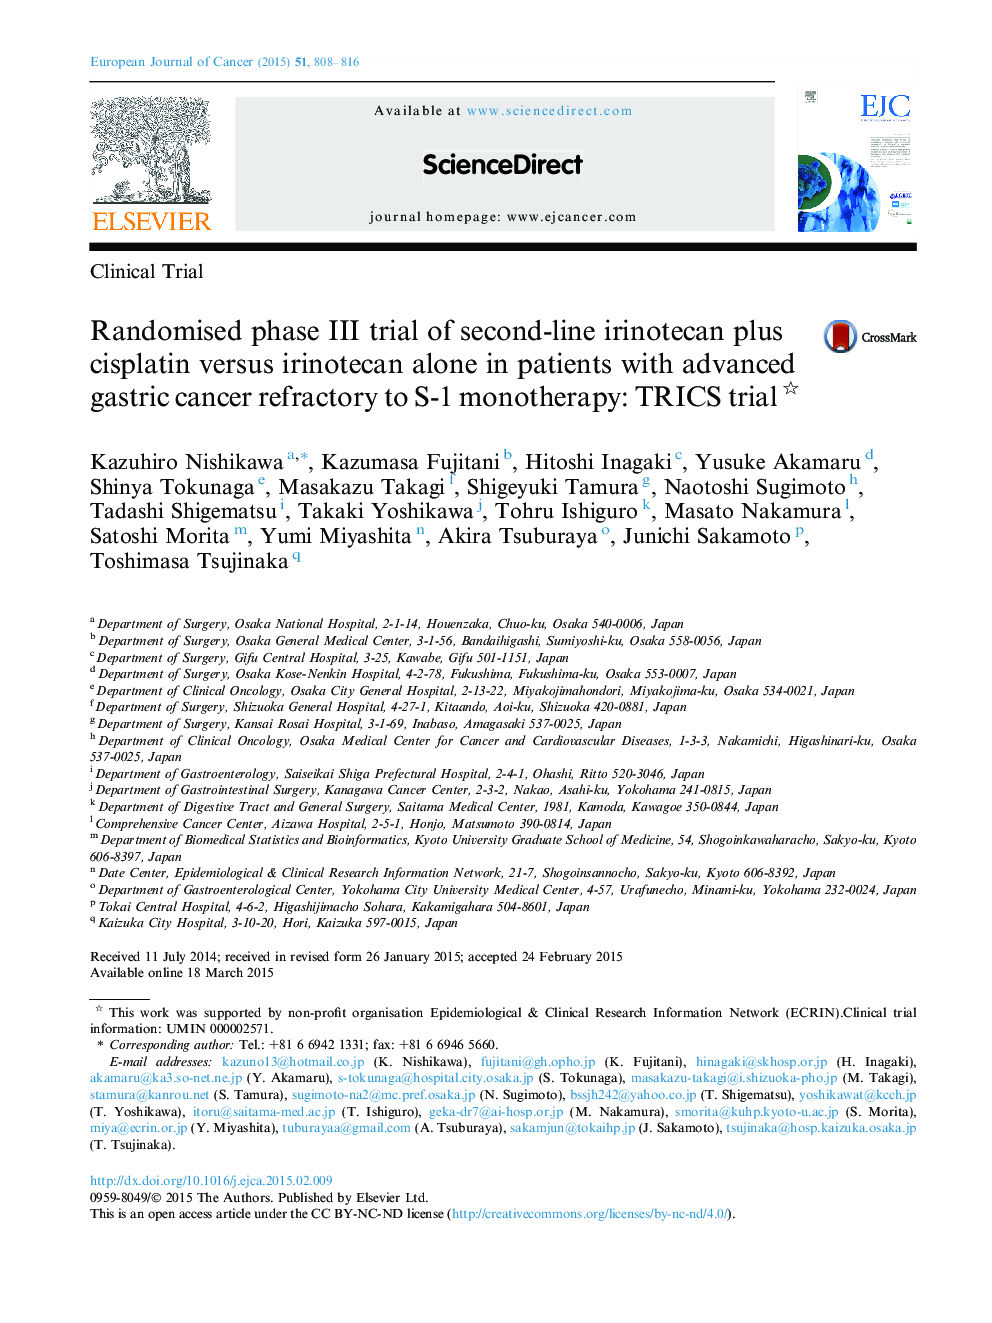 Randomised phase III trial of second-line irinotecan plus cisplatin versus irinotecan alone in patients with advanced gastric cancer refractory to S-1 monotherapy: TRICS trial